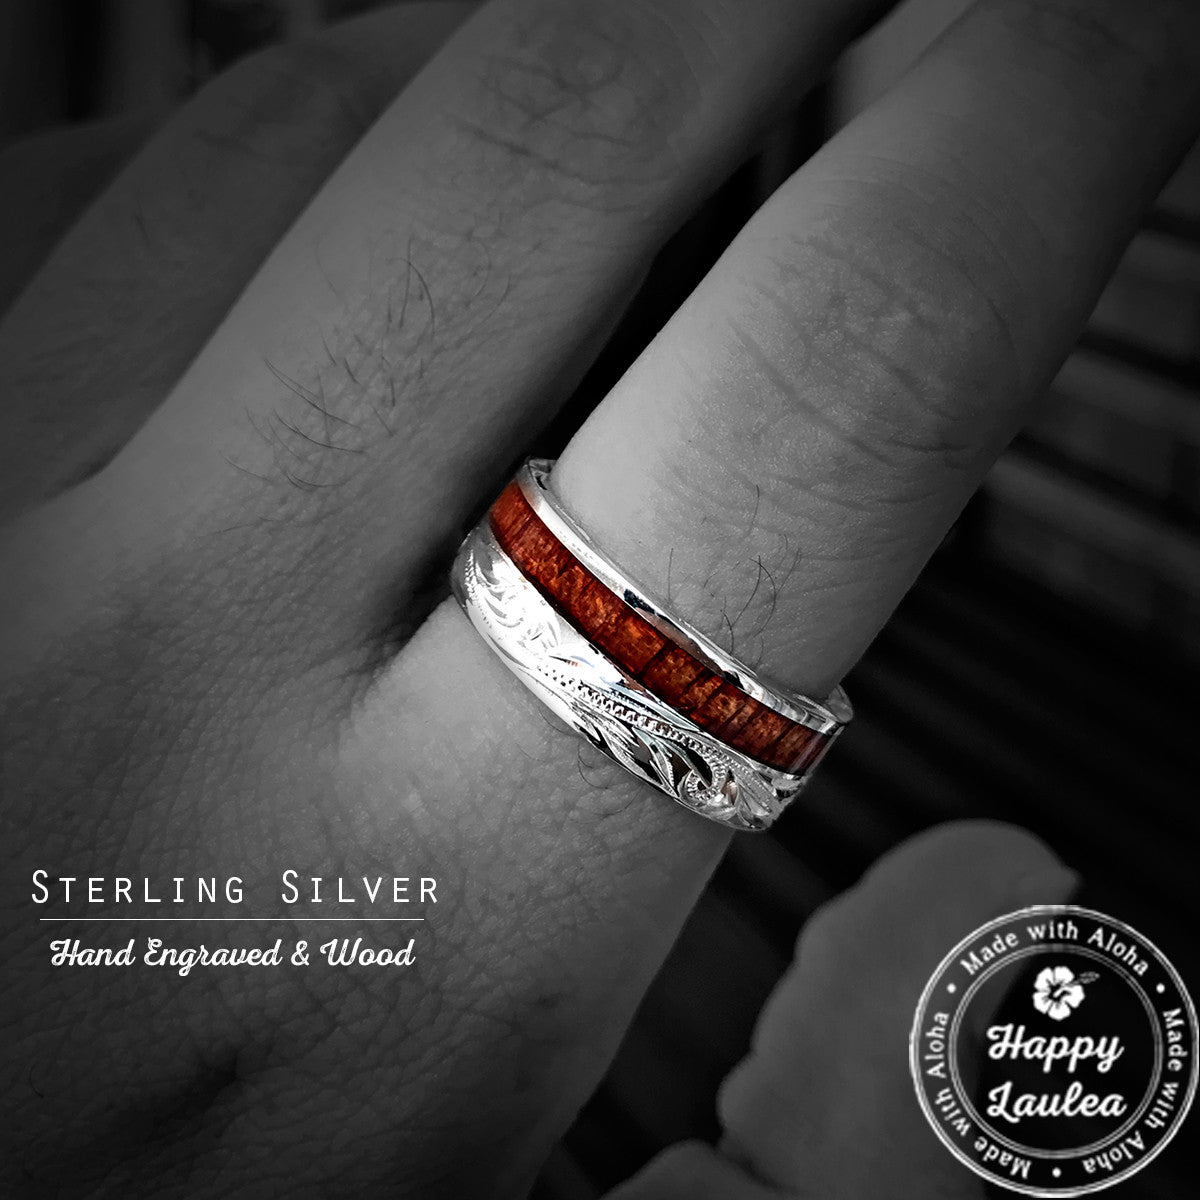 Sterling Silver Hand Engraved Ring with Offset Hawaiian Koa Wood Inlay